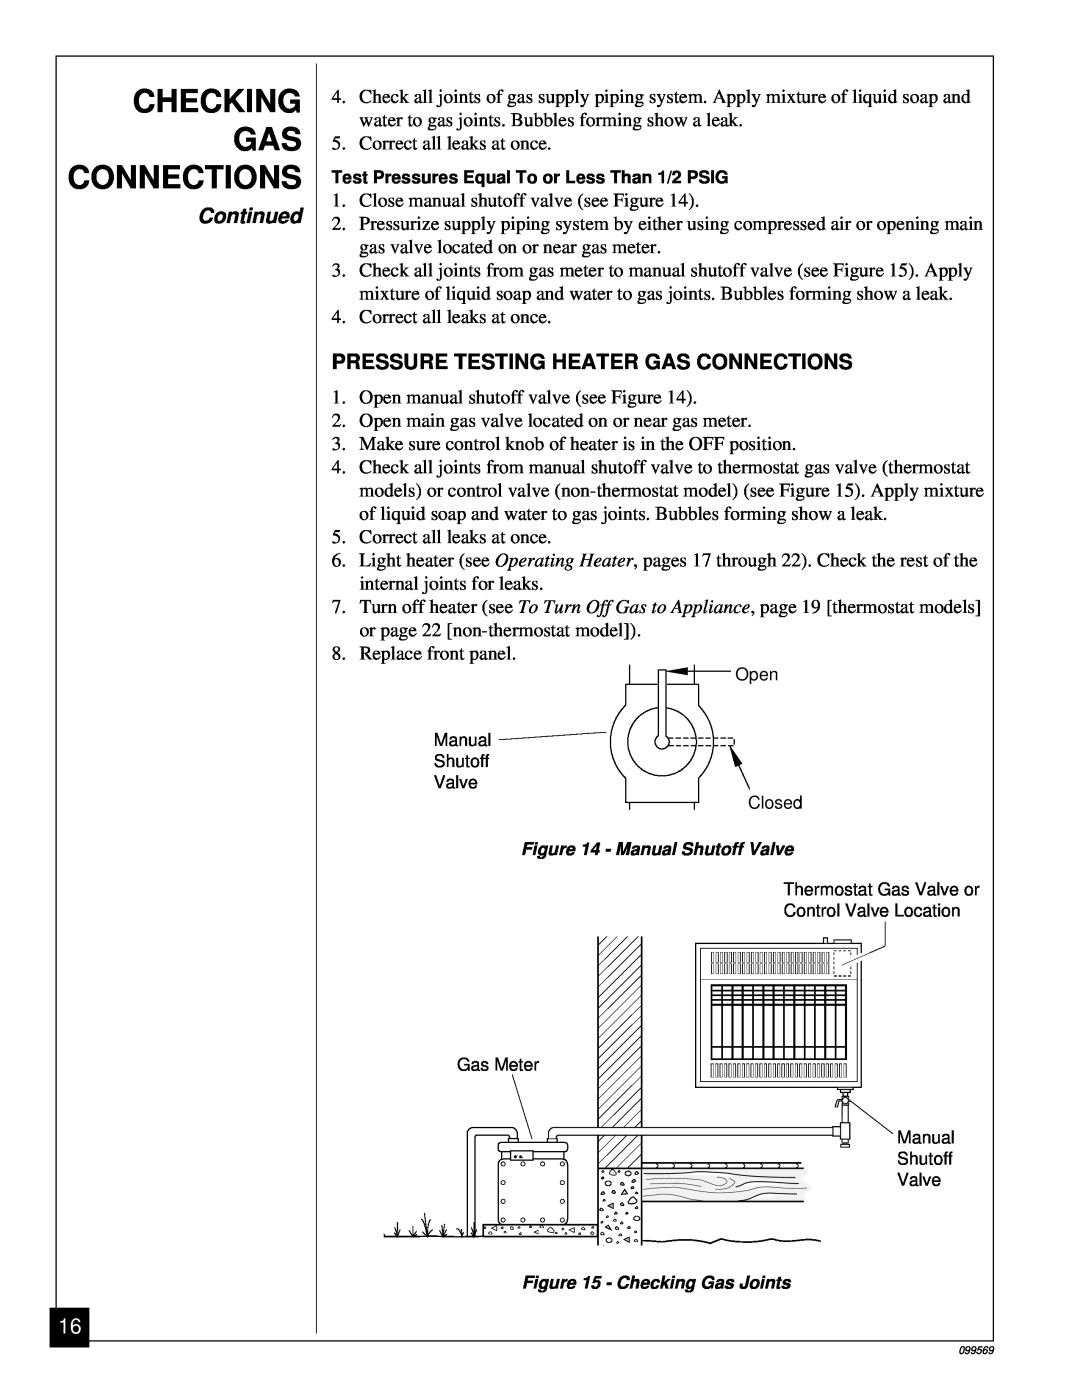 Desa A installation manual Checking, Continued, Pressure Testing Heater Gas Connections 